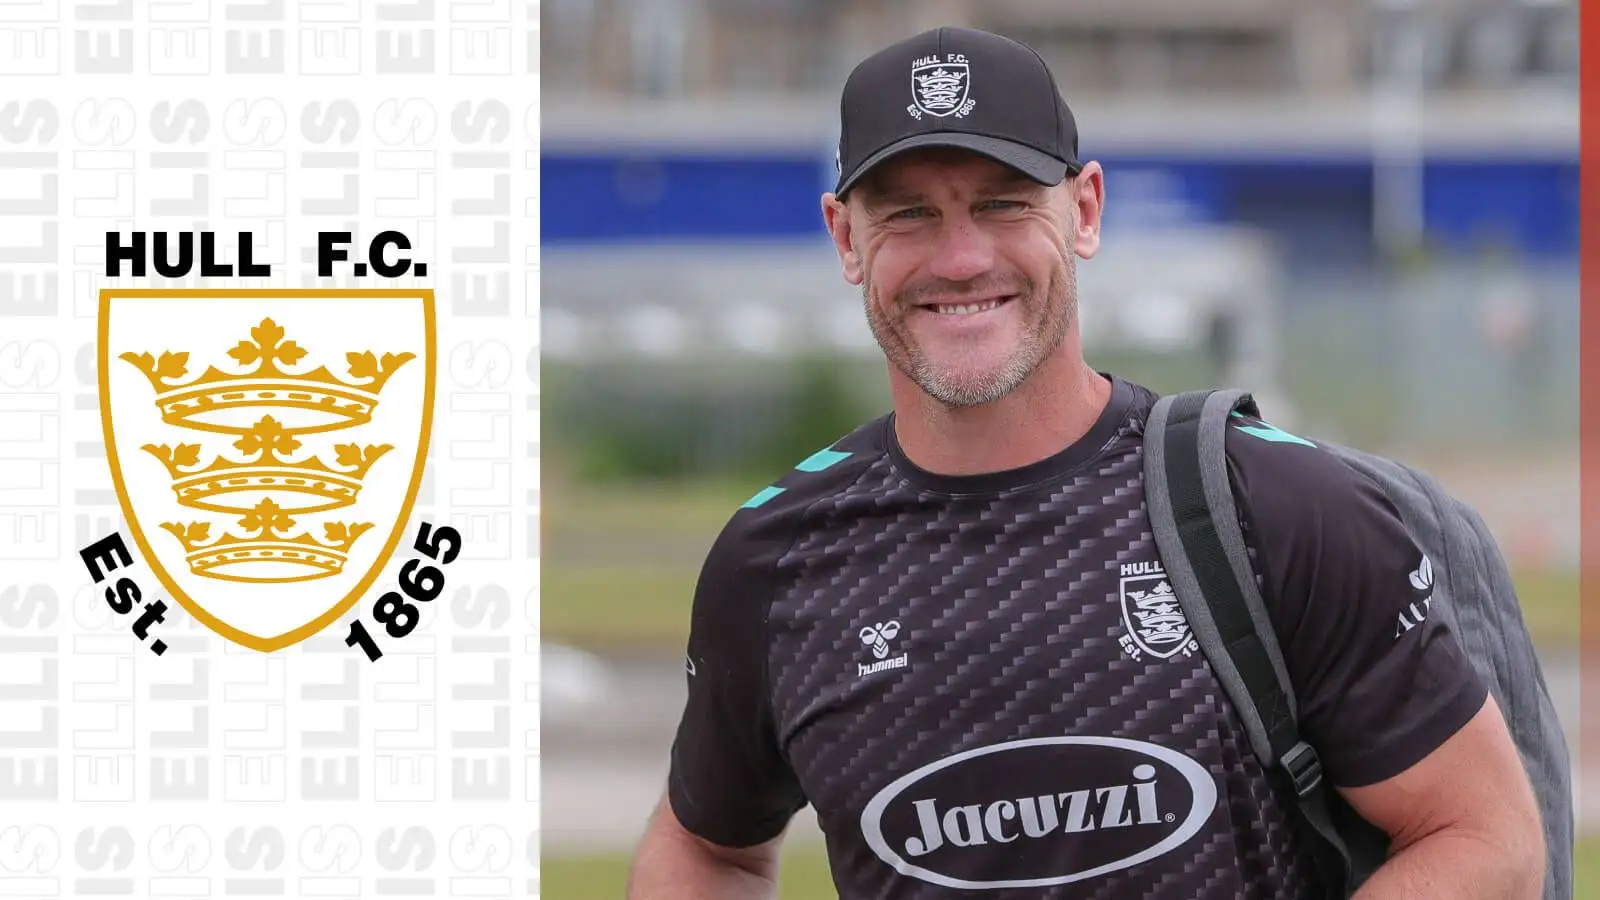 Exclusive: Hull FC legend Gareth Ellis ready to take new path after admitting ‘passion just isn’t there’ for coaching